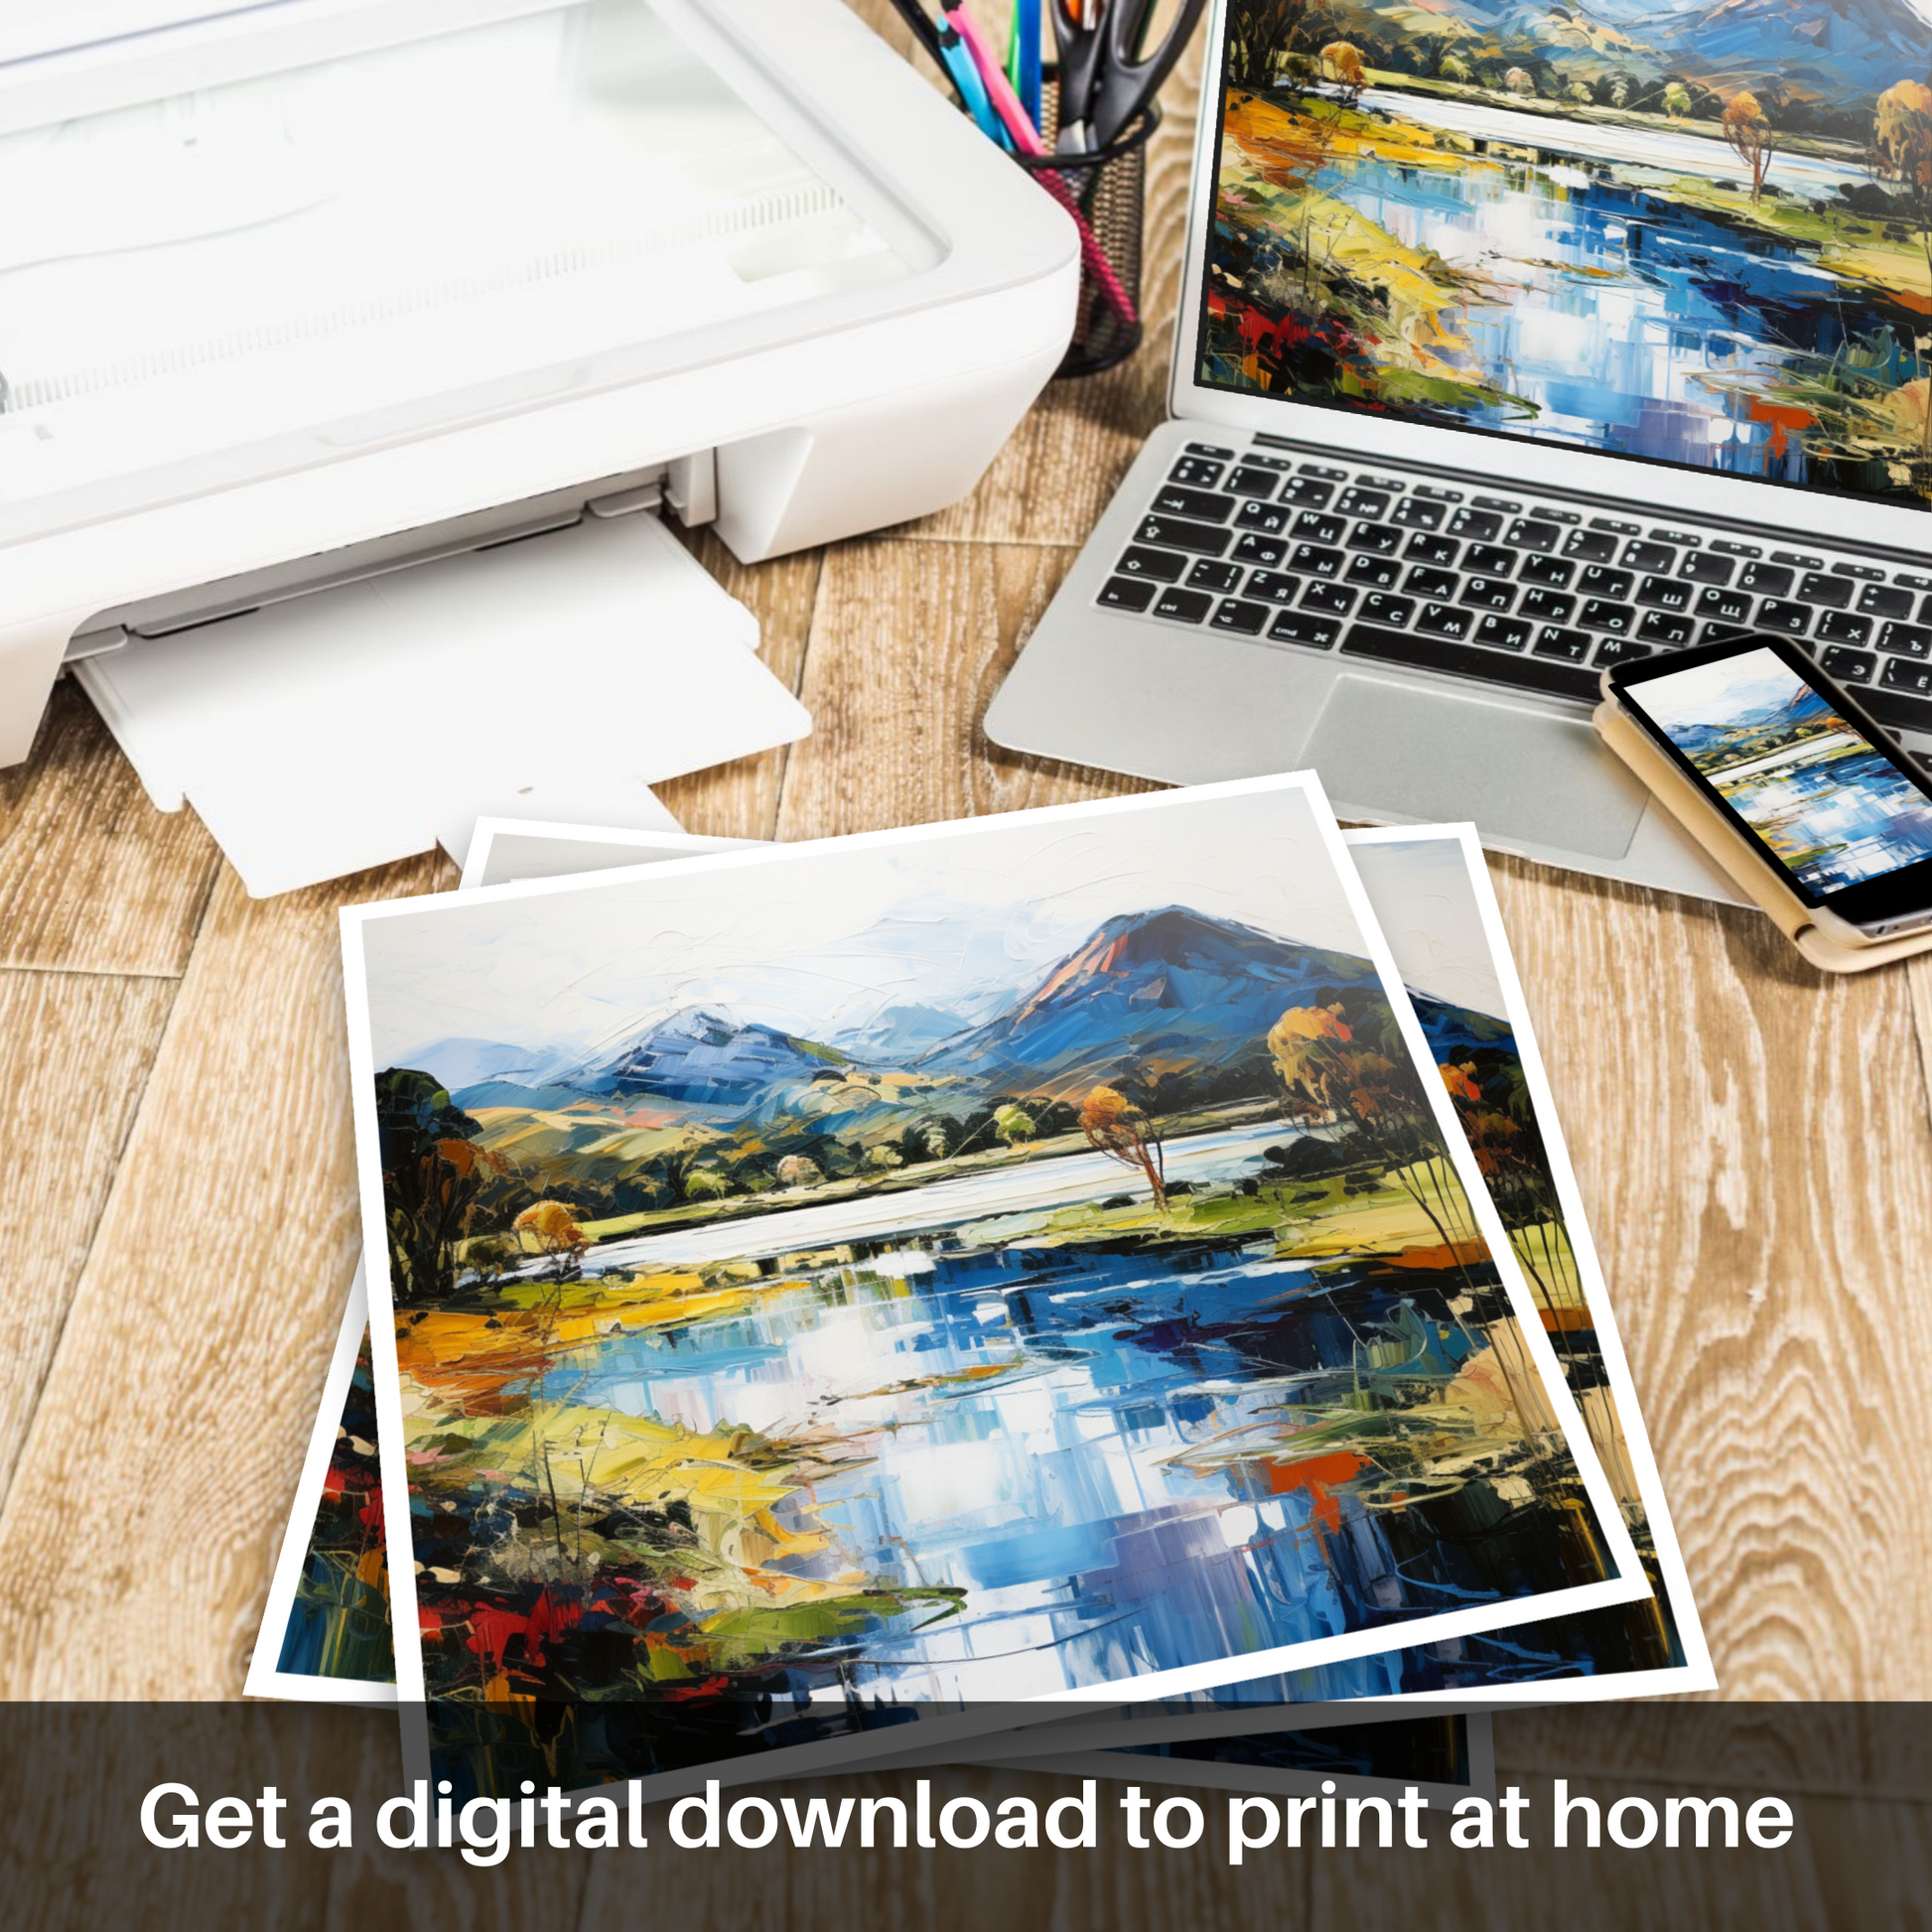 Downloadable and printable picture of Loch Ard, Stirling